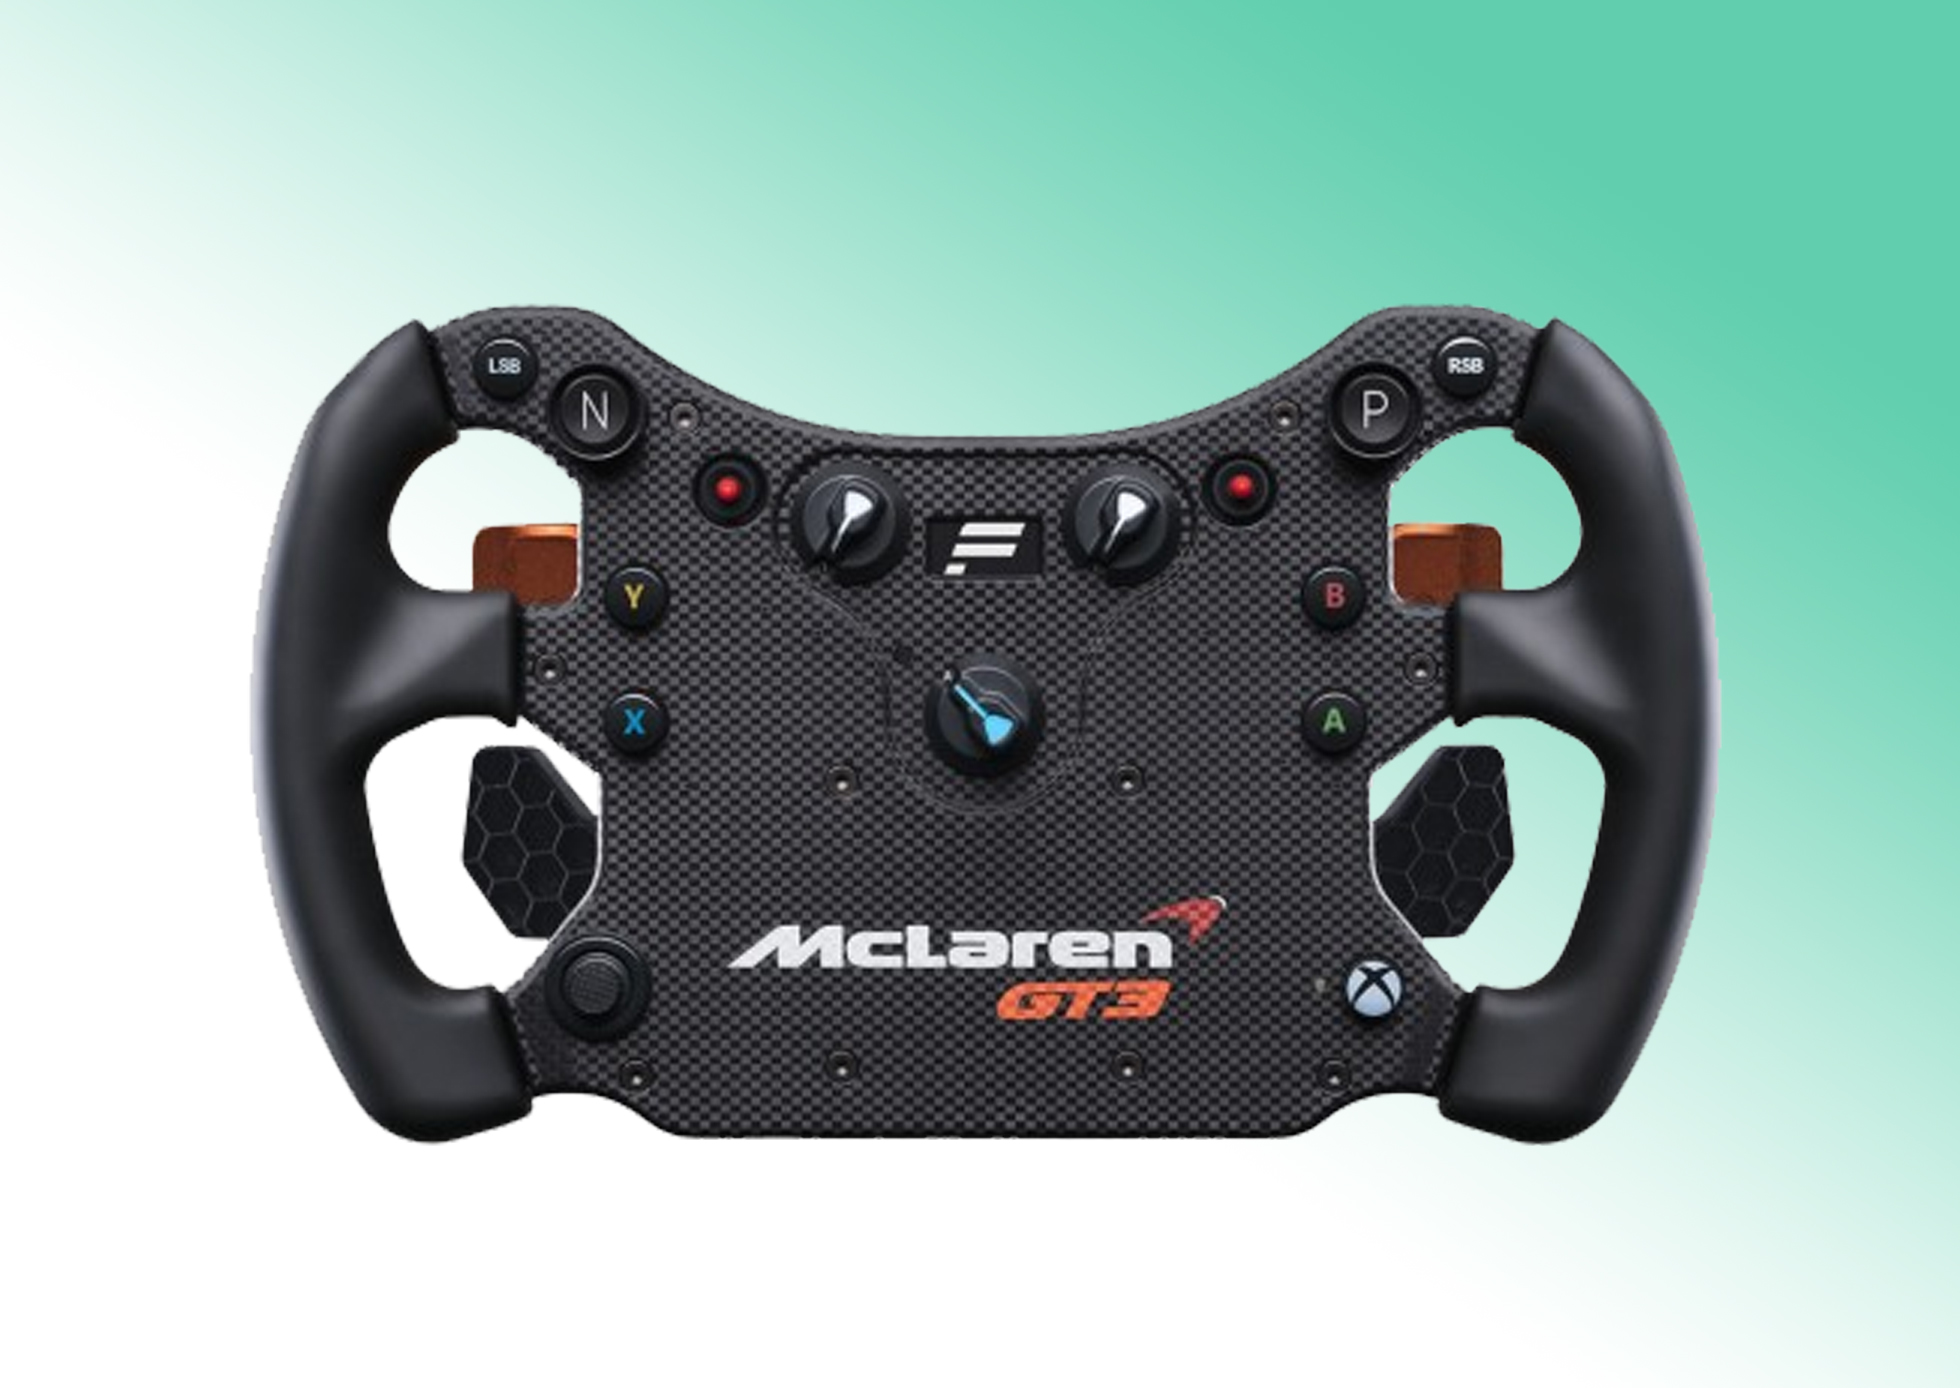 Test and Review Fanatec McLaren GT3 V2 Steering Wheel